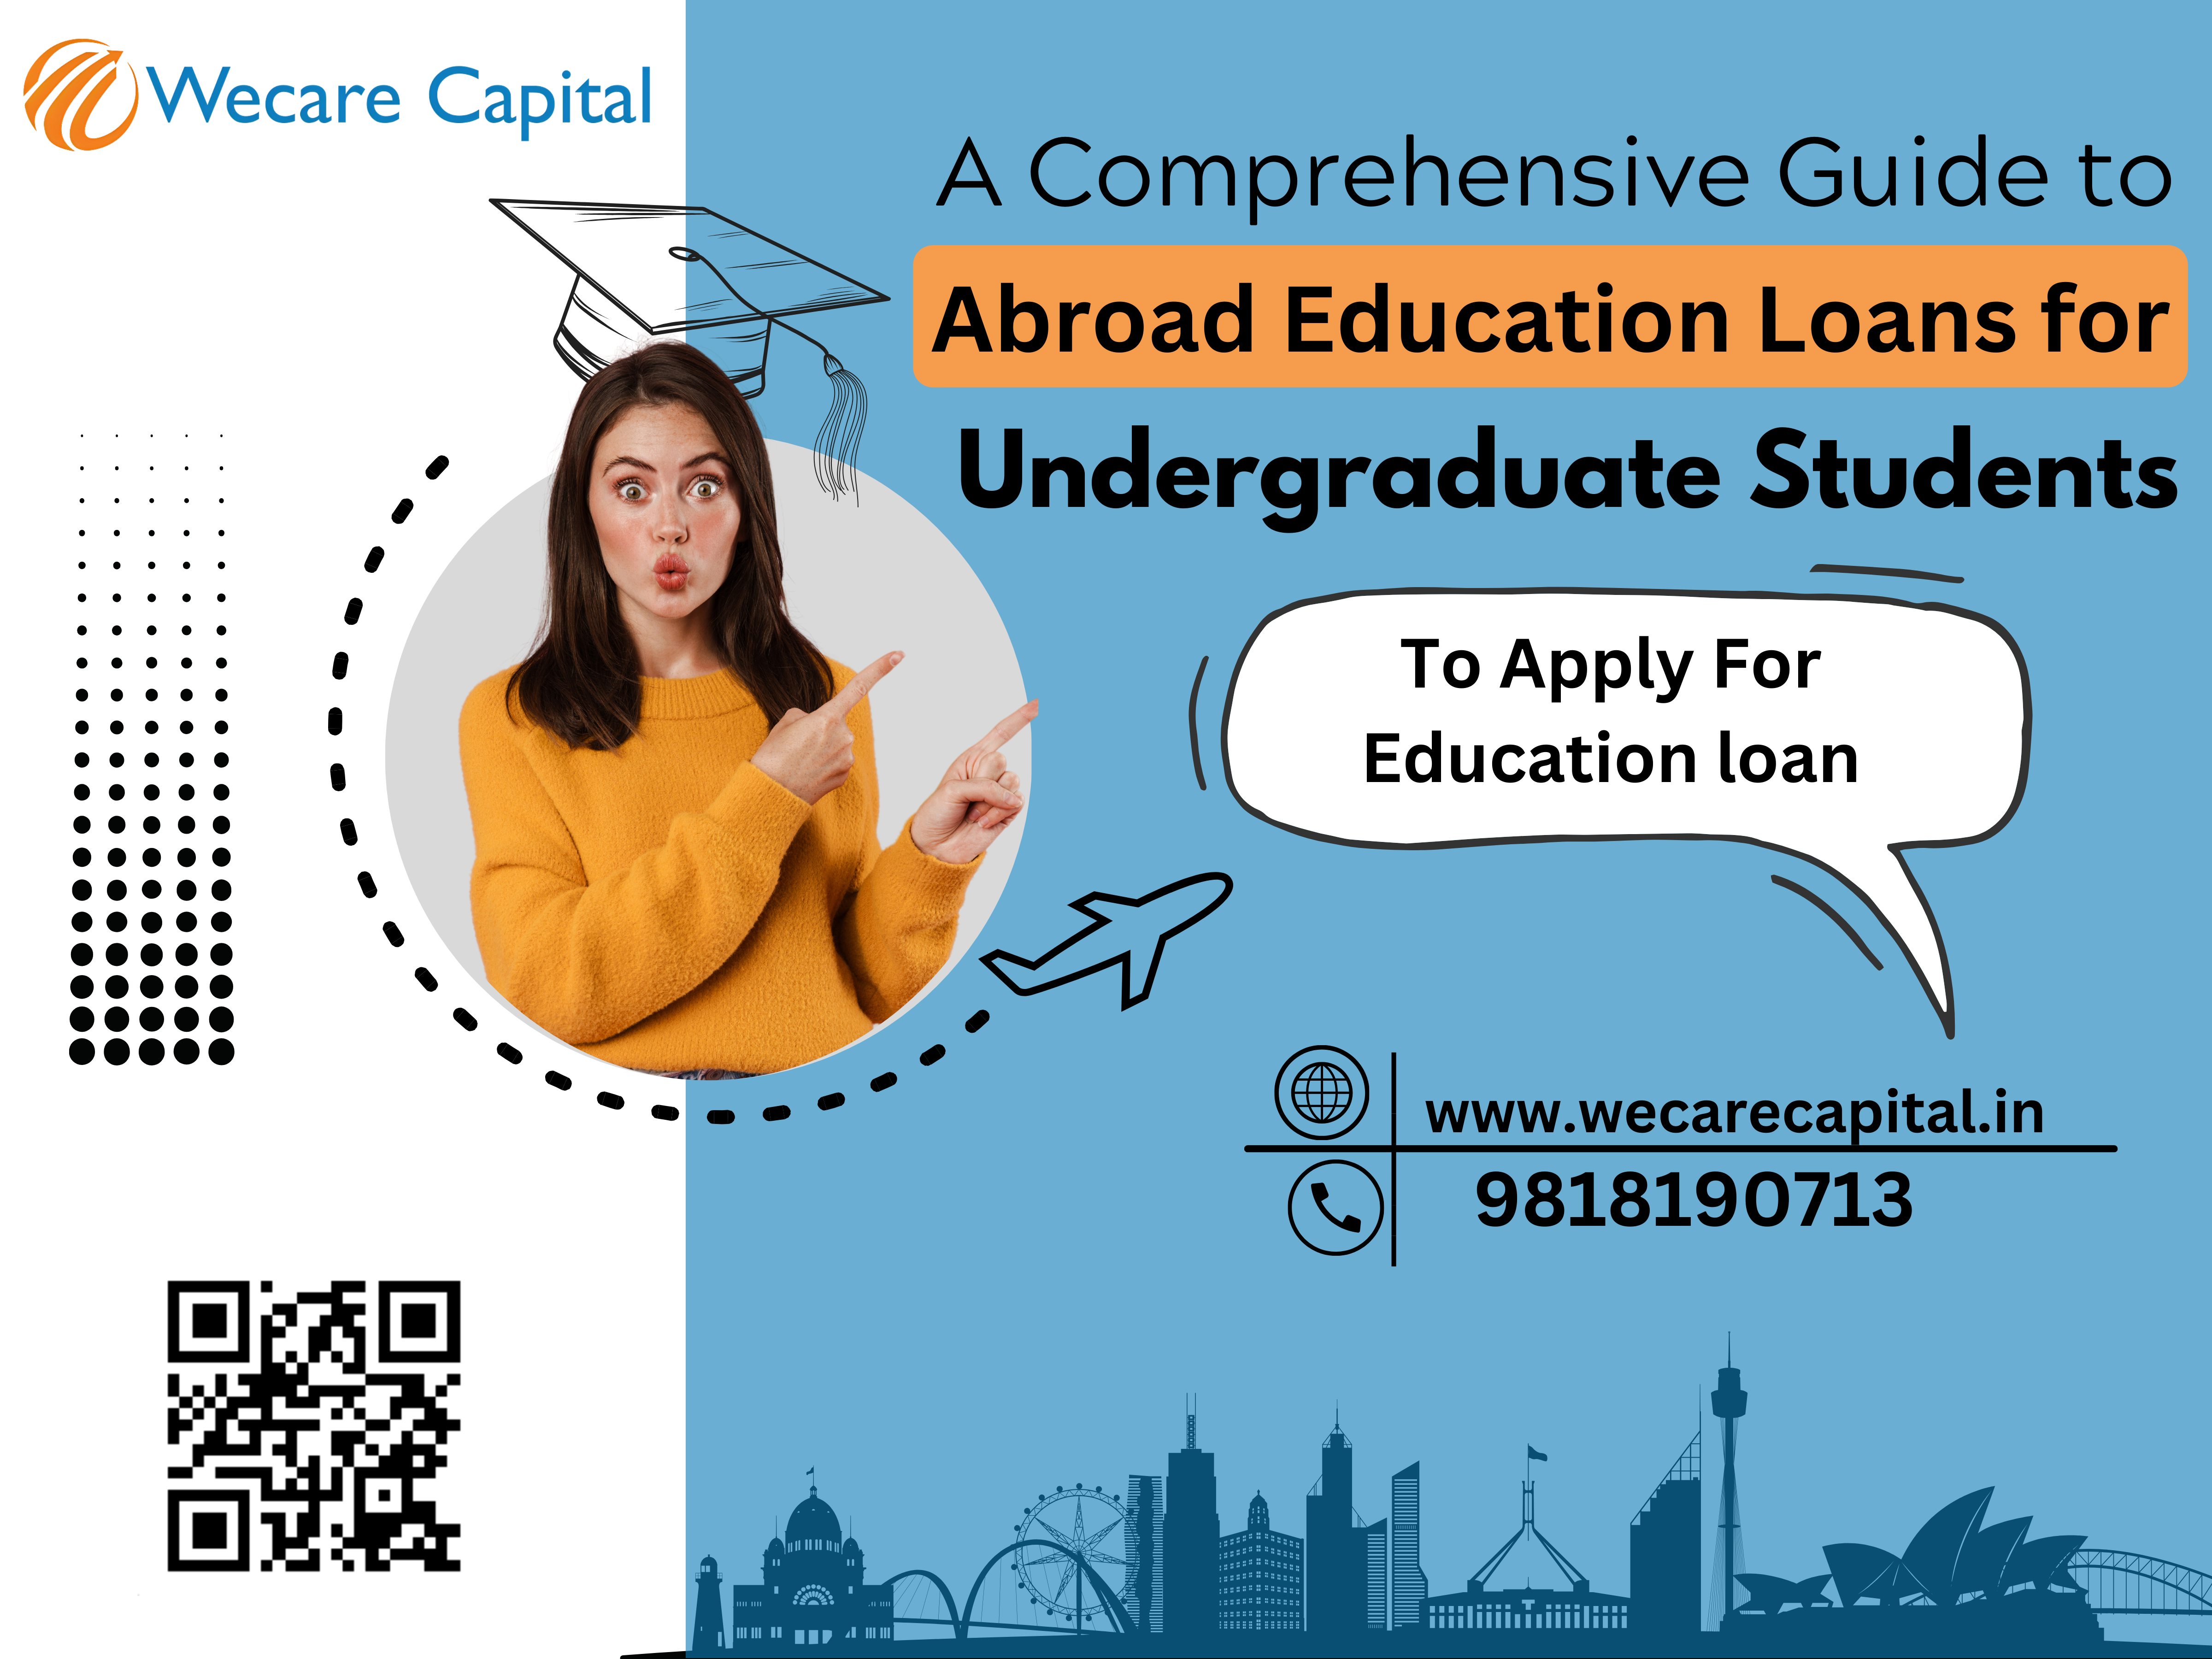 education loan for abroad study